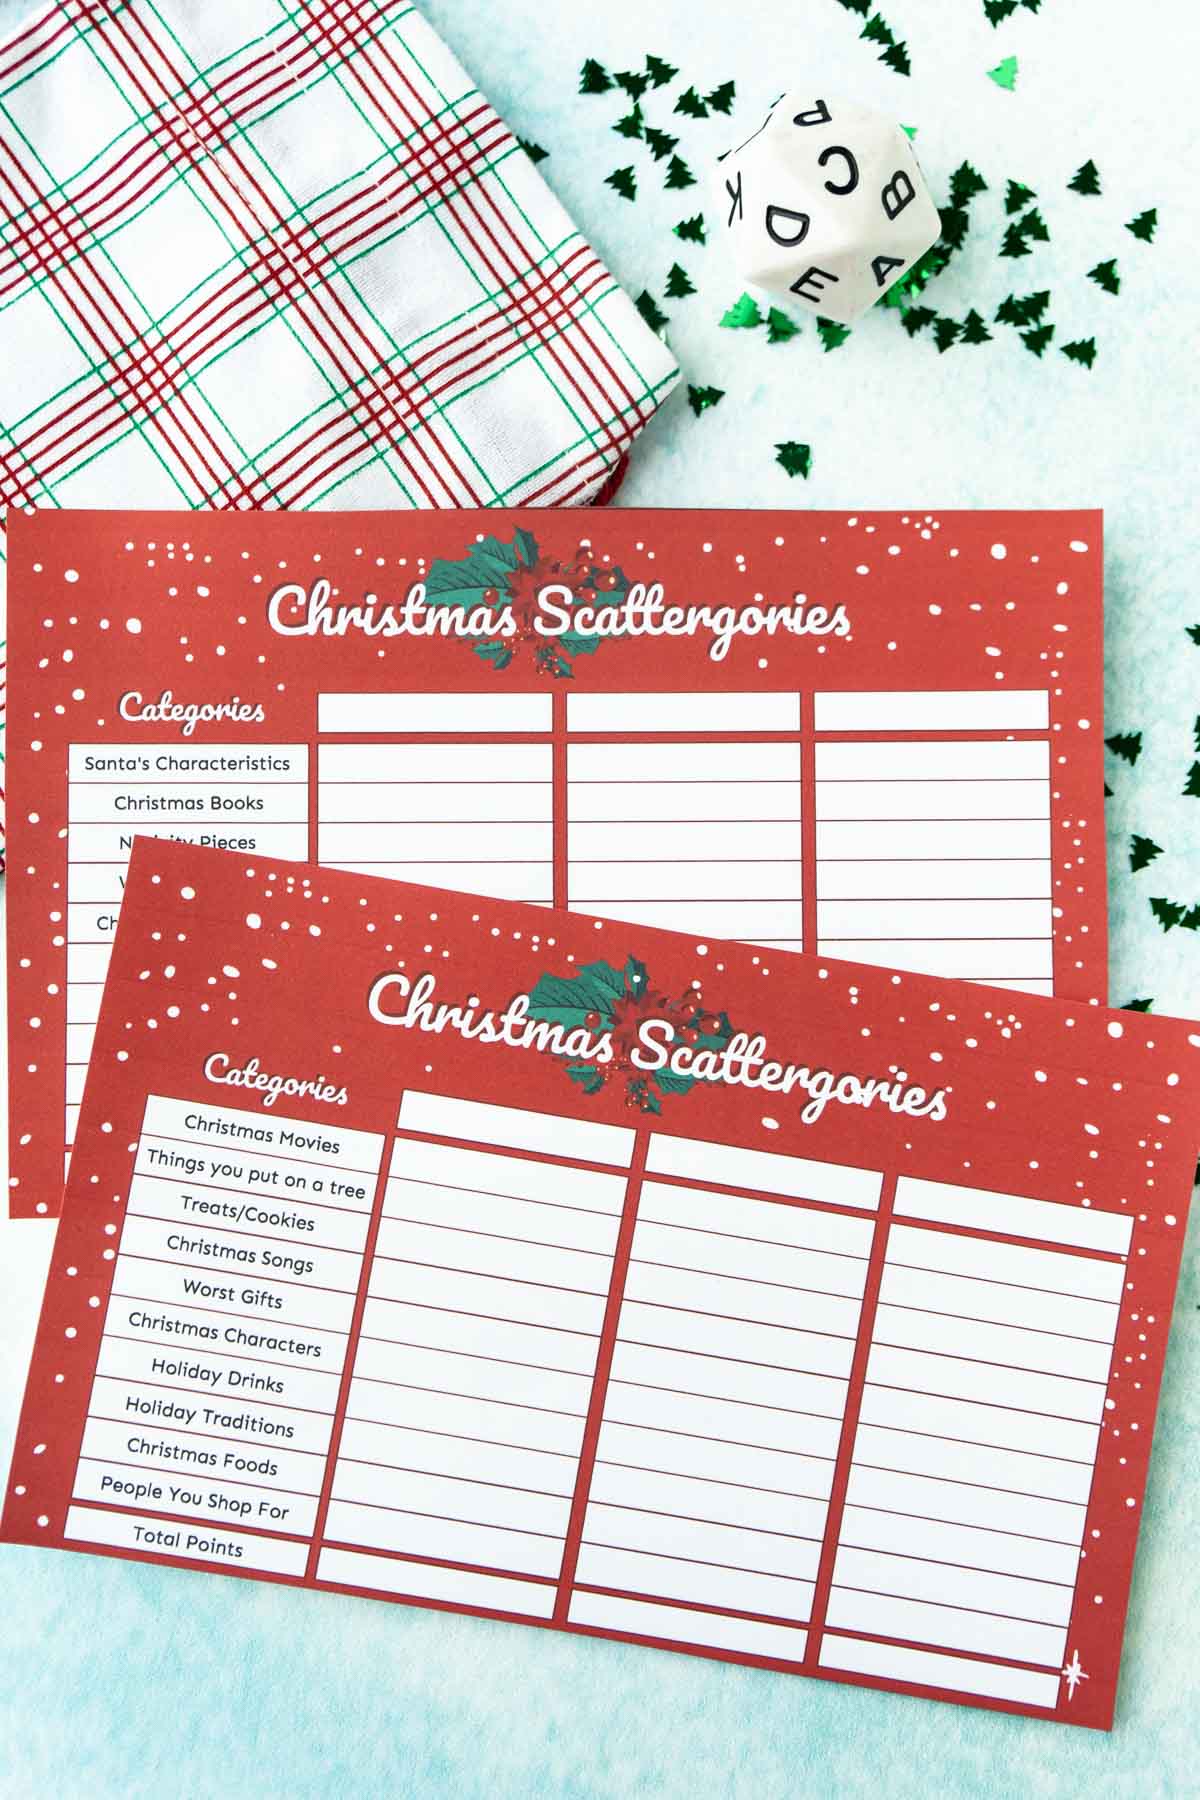 Two Christmas scattergories cards on top of each other